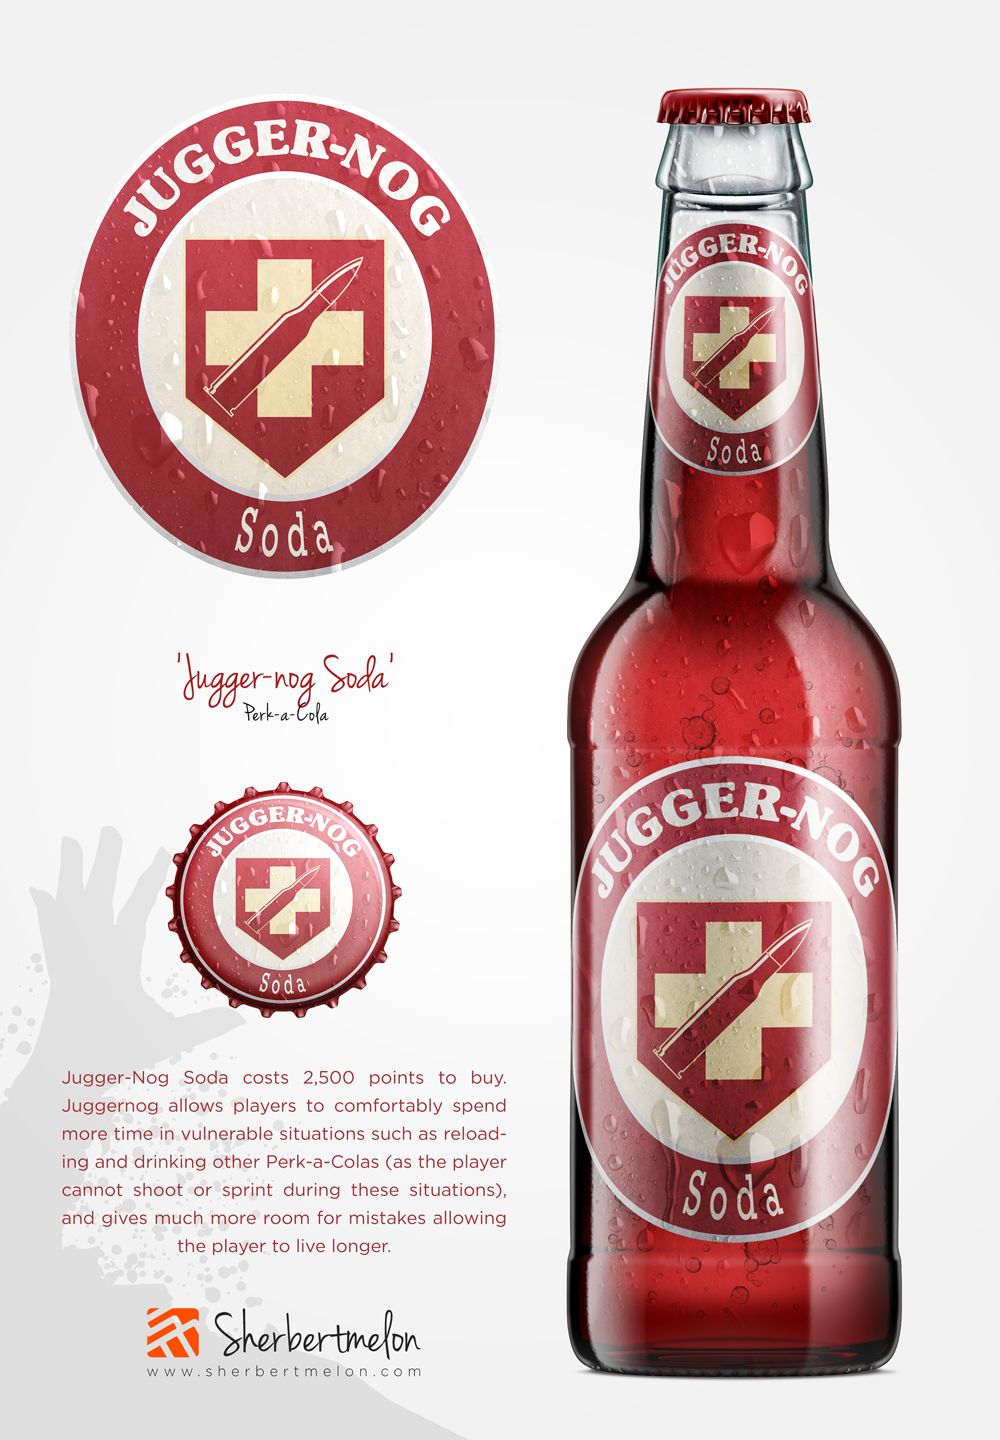 Call of Duty Perk-a-Cola's on Behance